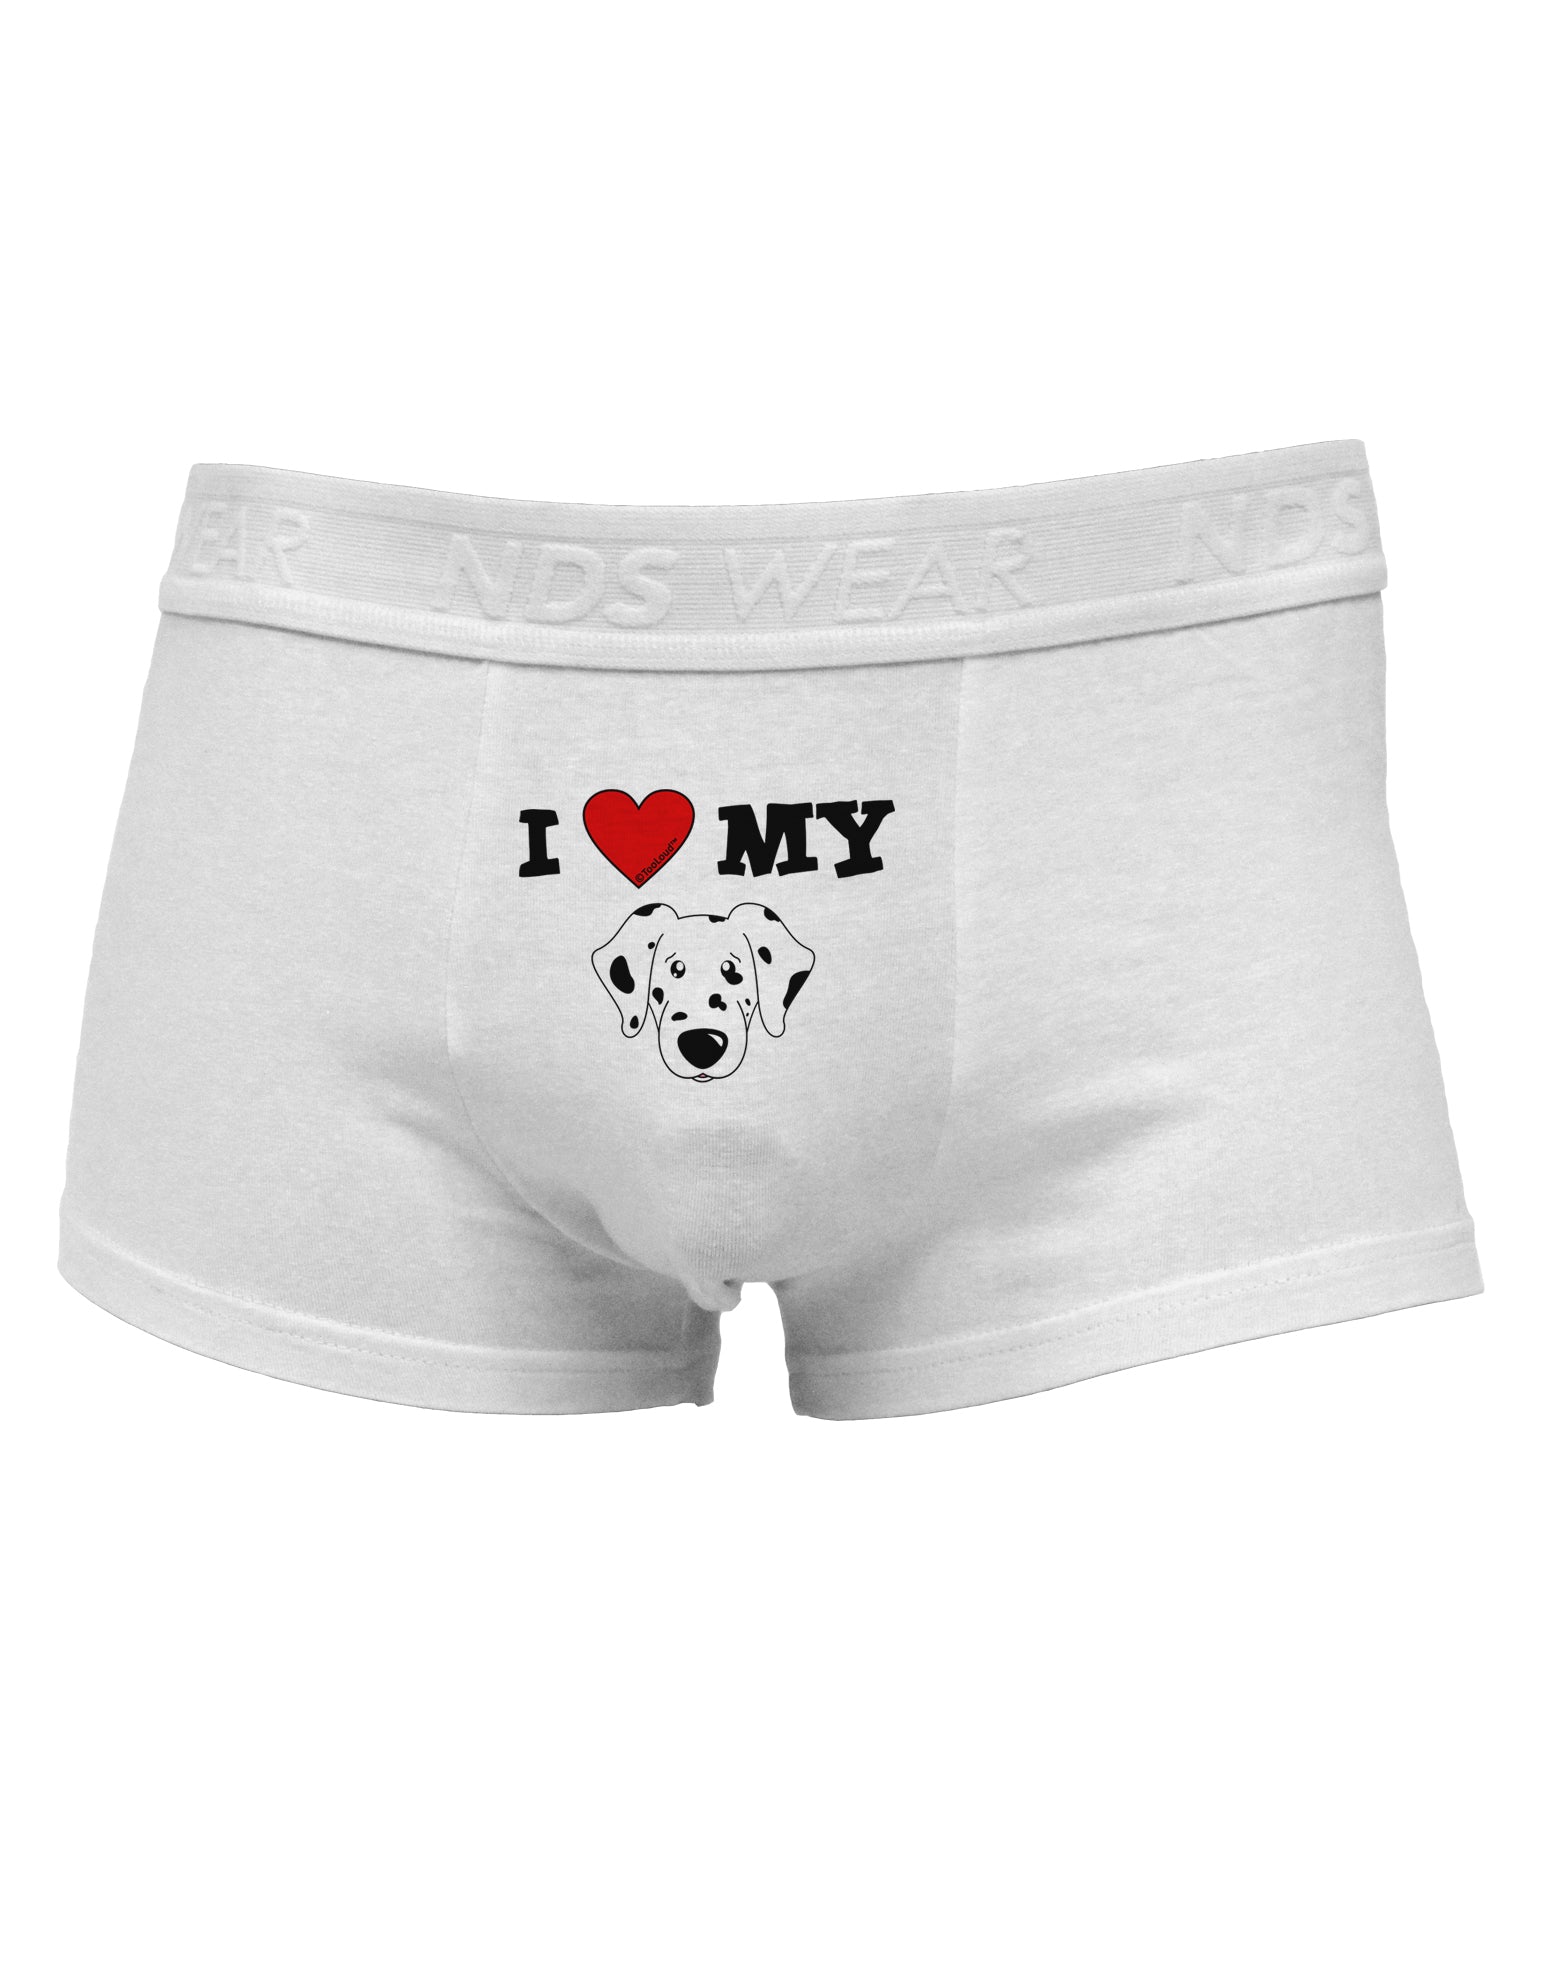 I Heart My Frenchie Mens NDS Wear Briefs Underwear by TooLoud